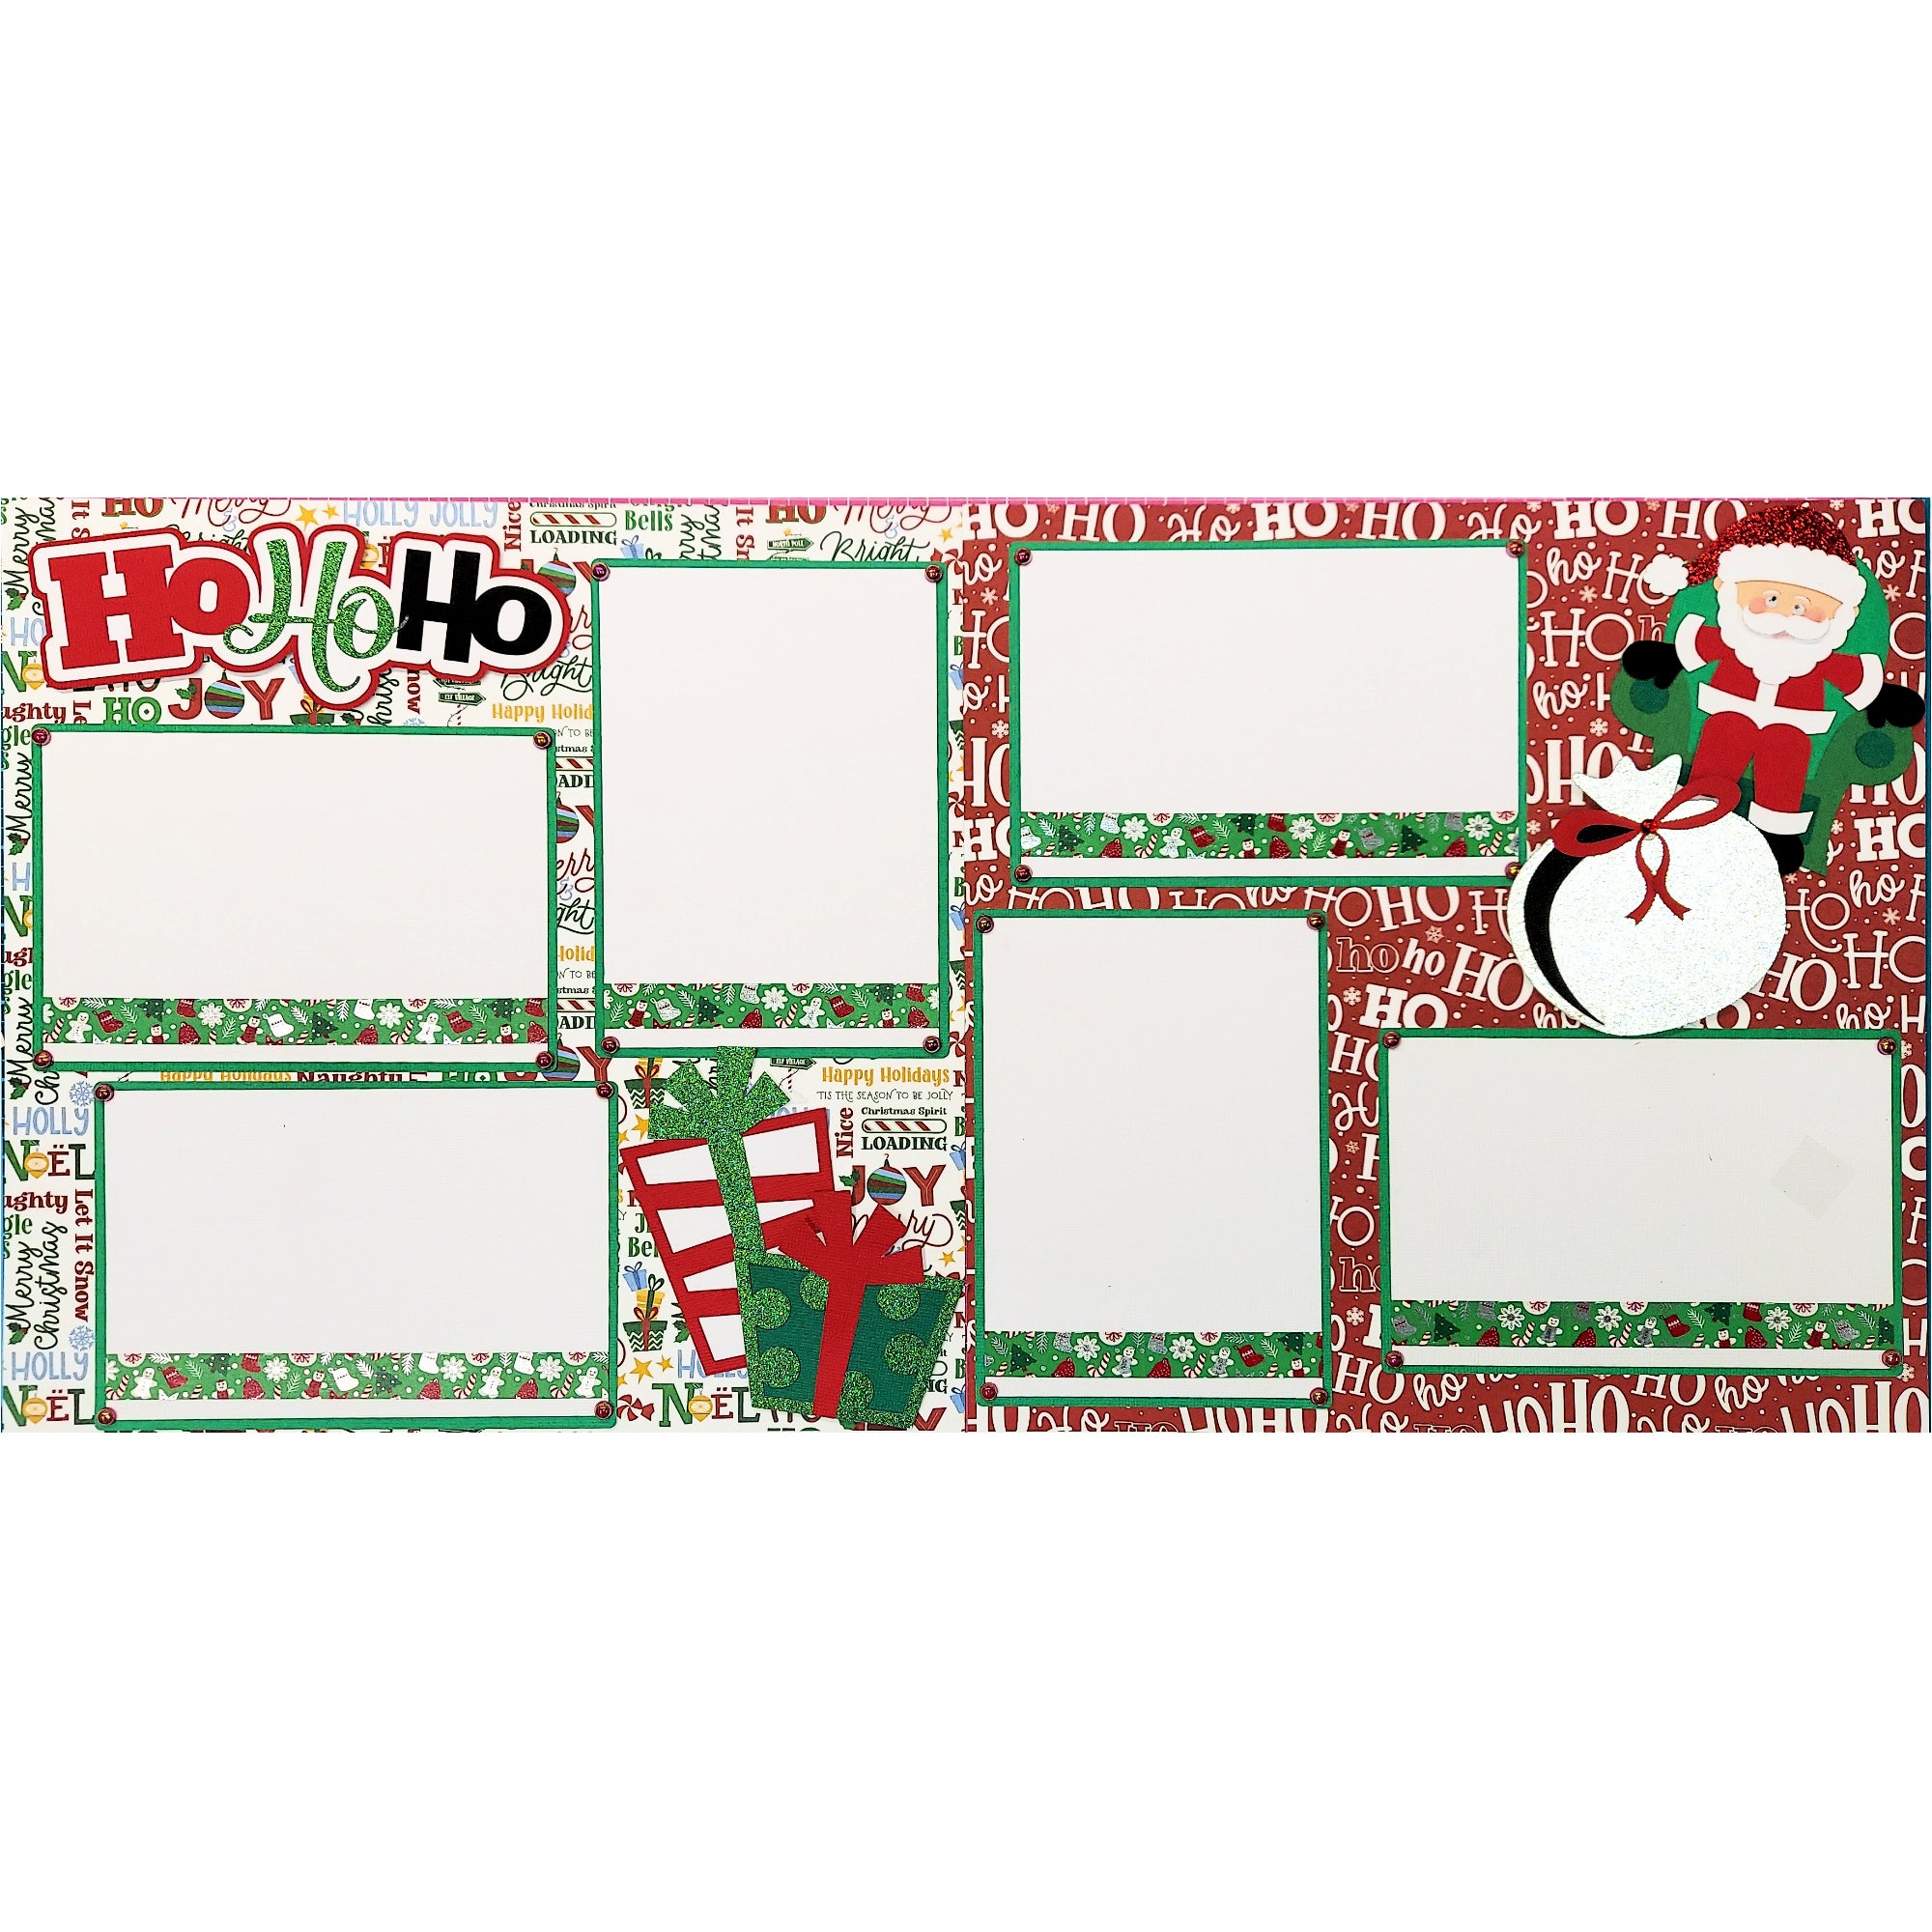 Ho Ho Ho Santa (2) - 12 x 12 Pages, Fully-Assembled & Hand-Crafted 3D Scrapbook Premade by SSC Designs